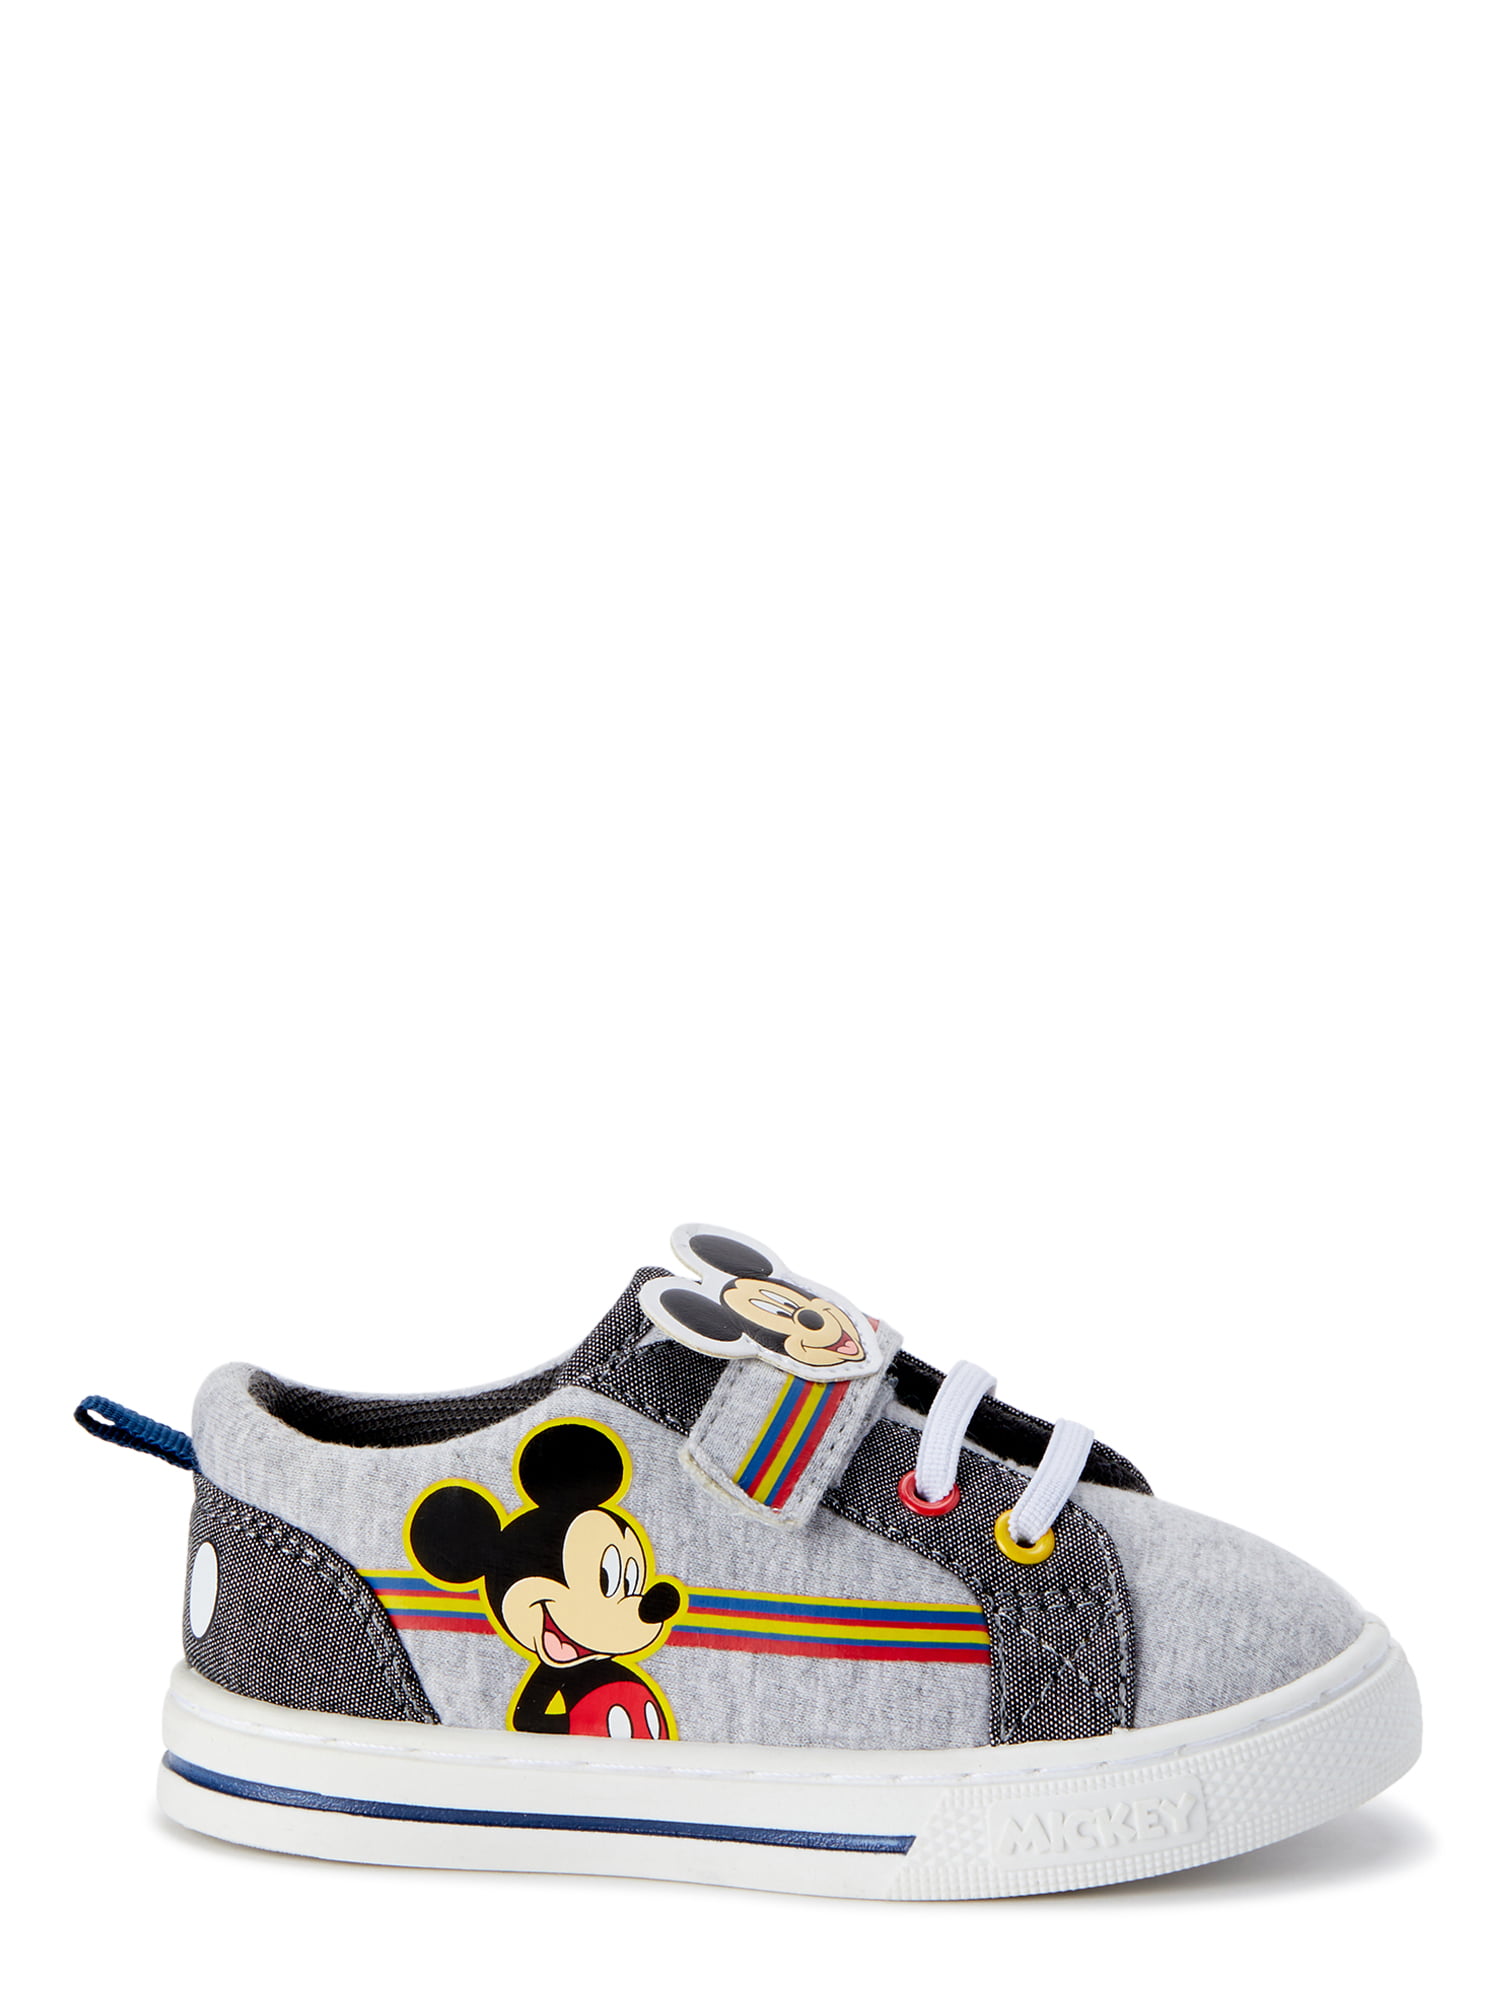 mickey mouse shoes walmart